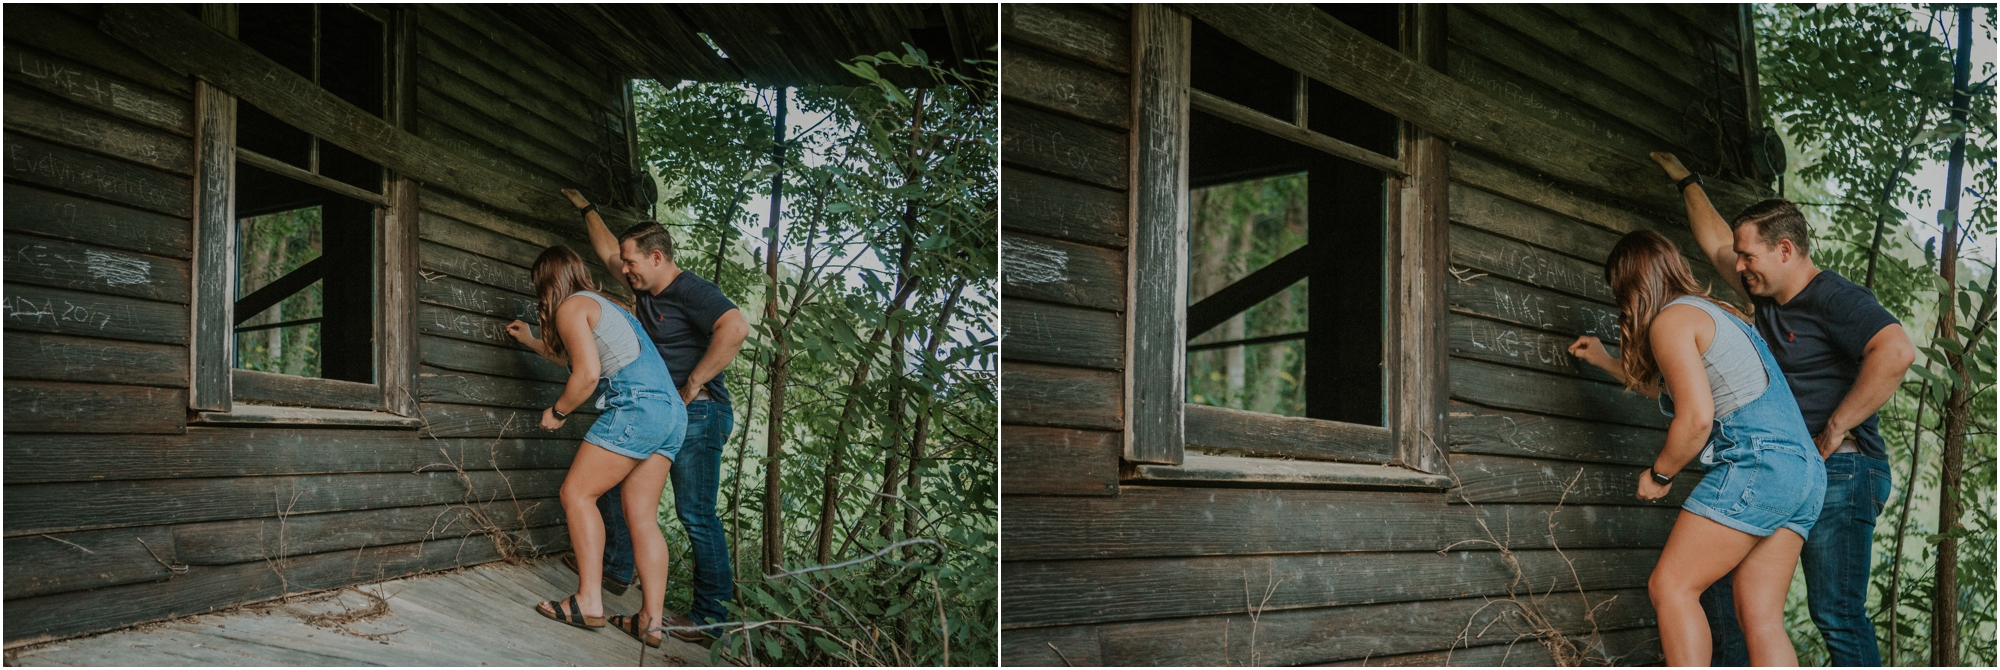 rustic-farm-virginia-countryside-sunset-engagement-session-grayson-county-independence-katy-sergent-northeast-tennessee_0057.jpg